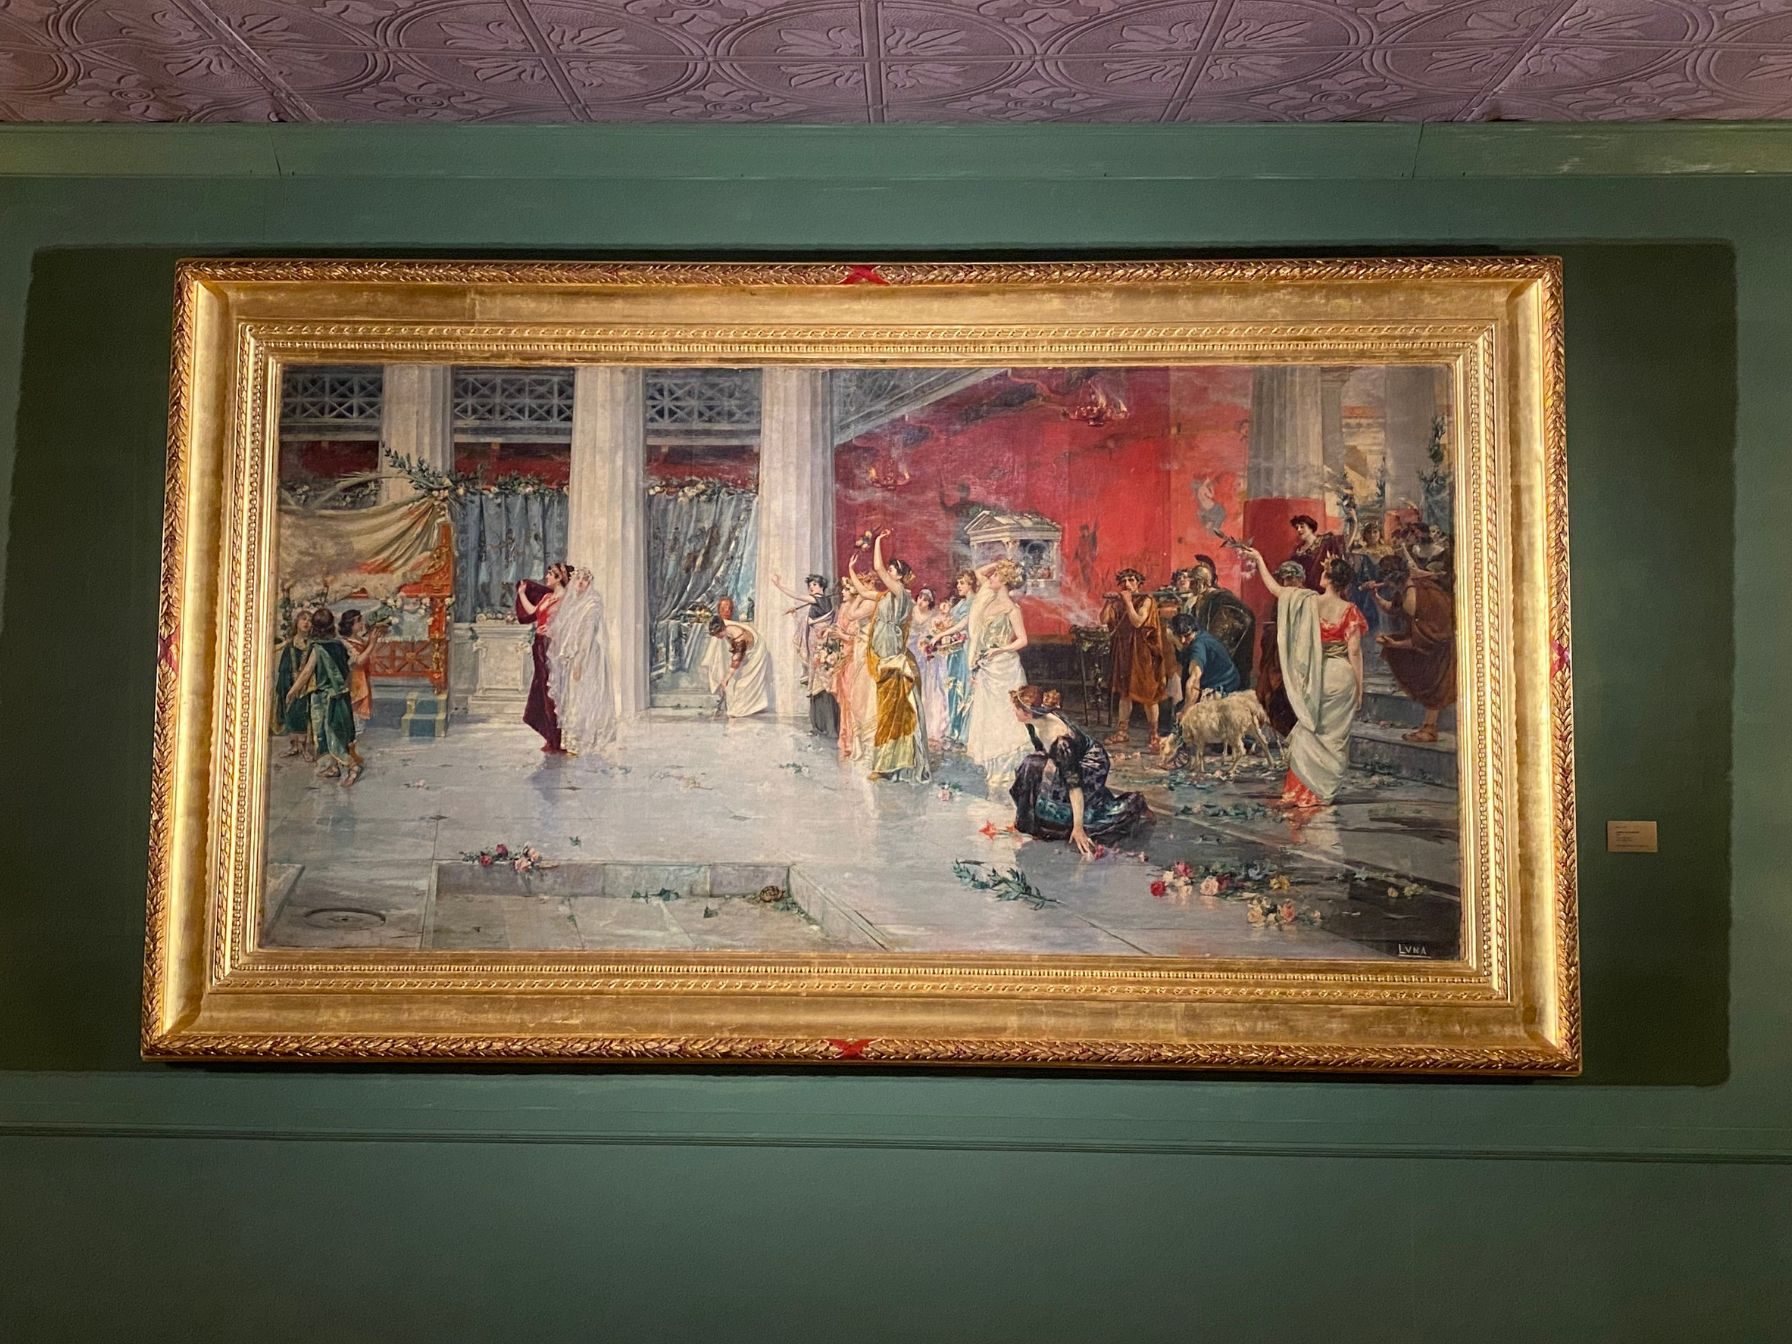 ‘Holy grail’: Juan Luna’s lost masterpiece revealed after 132 years